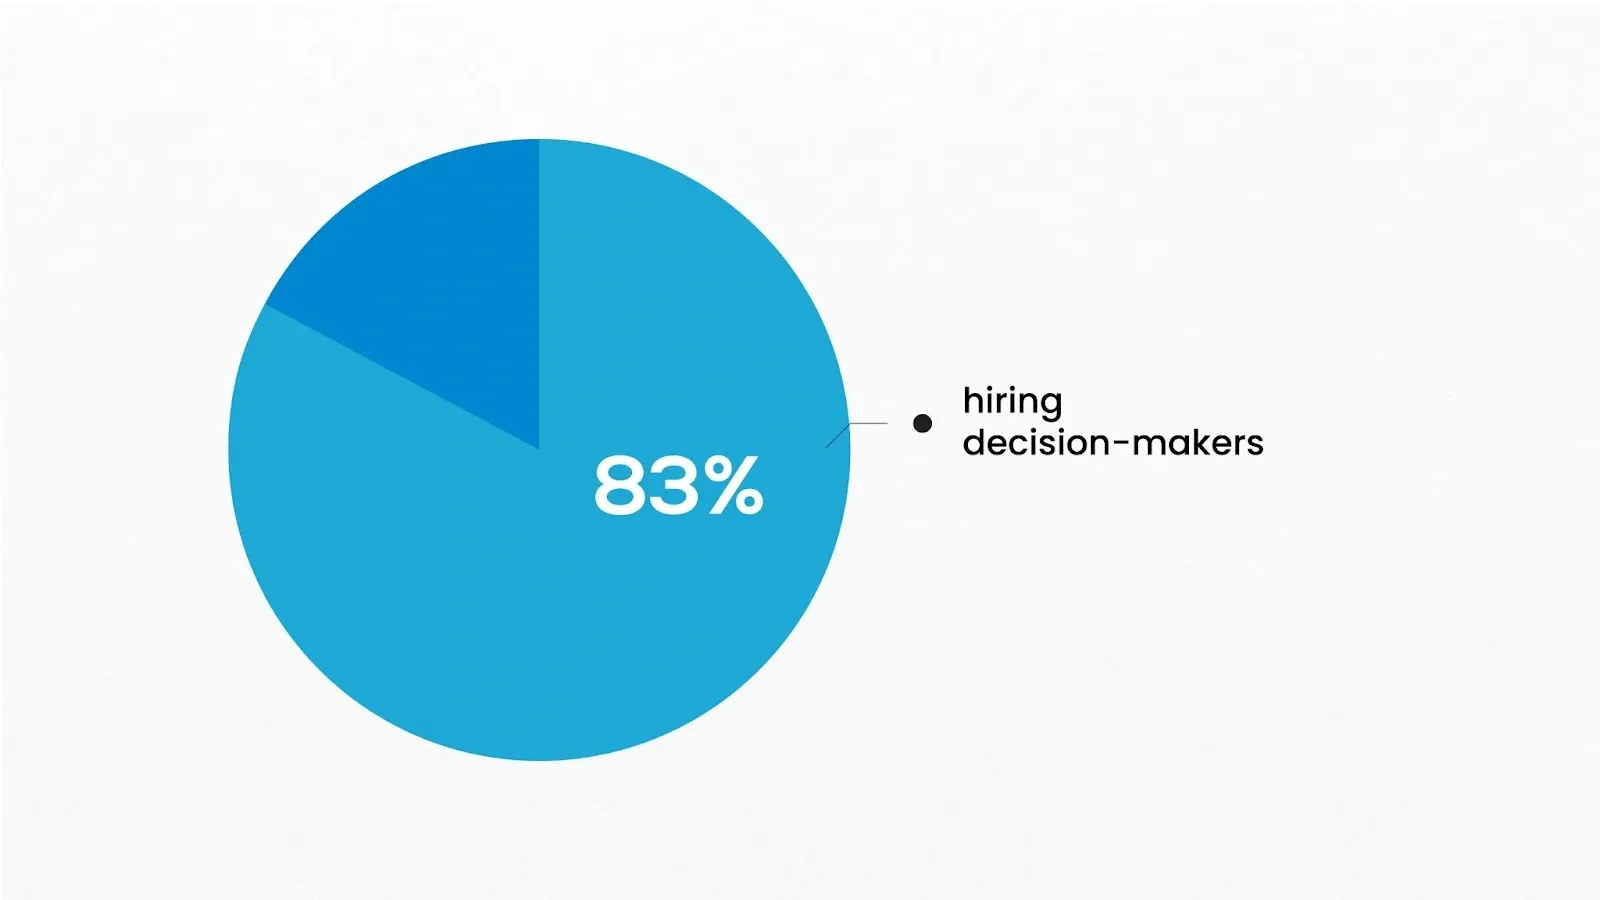 a blue pie chart showing 83% of hiring decision makers